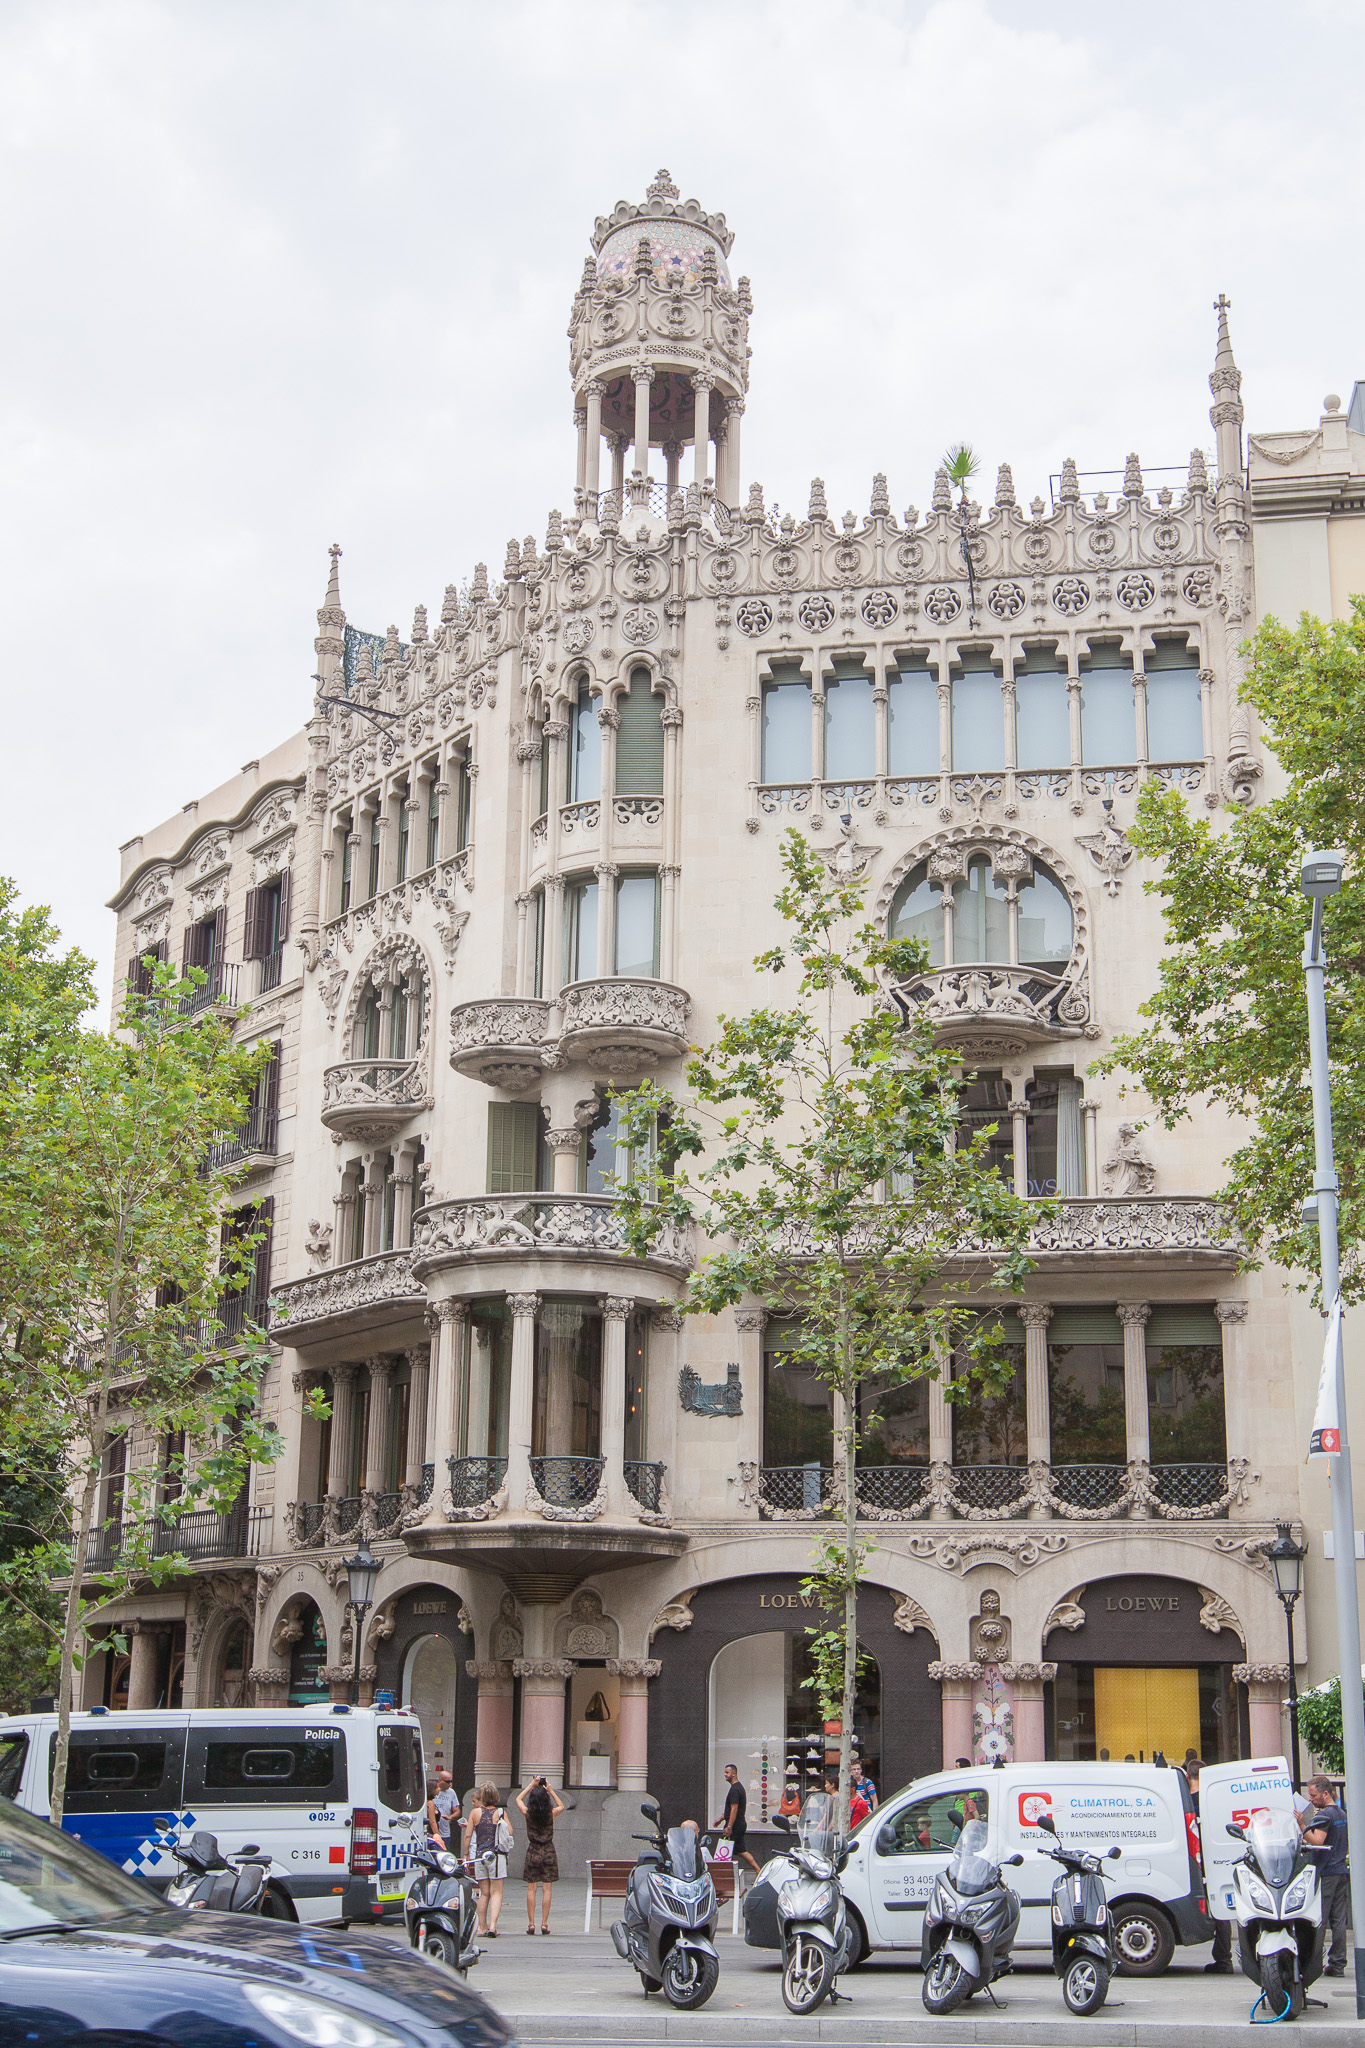 Barcelona, Spain is such a colorful city to explore! It’s the perfect place for a fun couple’s trip. Check out our top 6 activities during your 48 hours in the city. | www.eatworktravel.com The luxury, adventure travel couple!